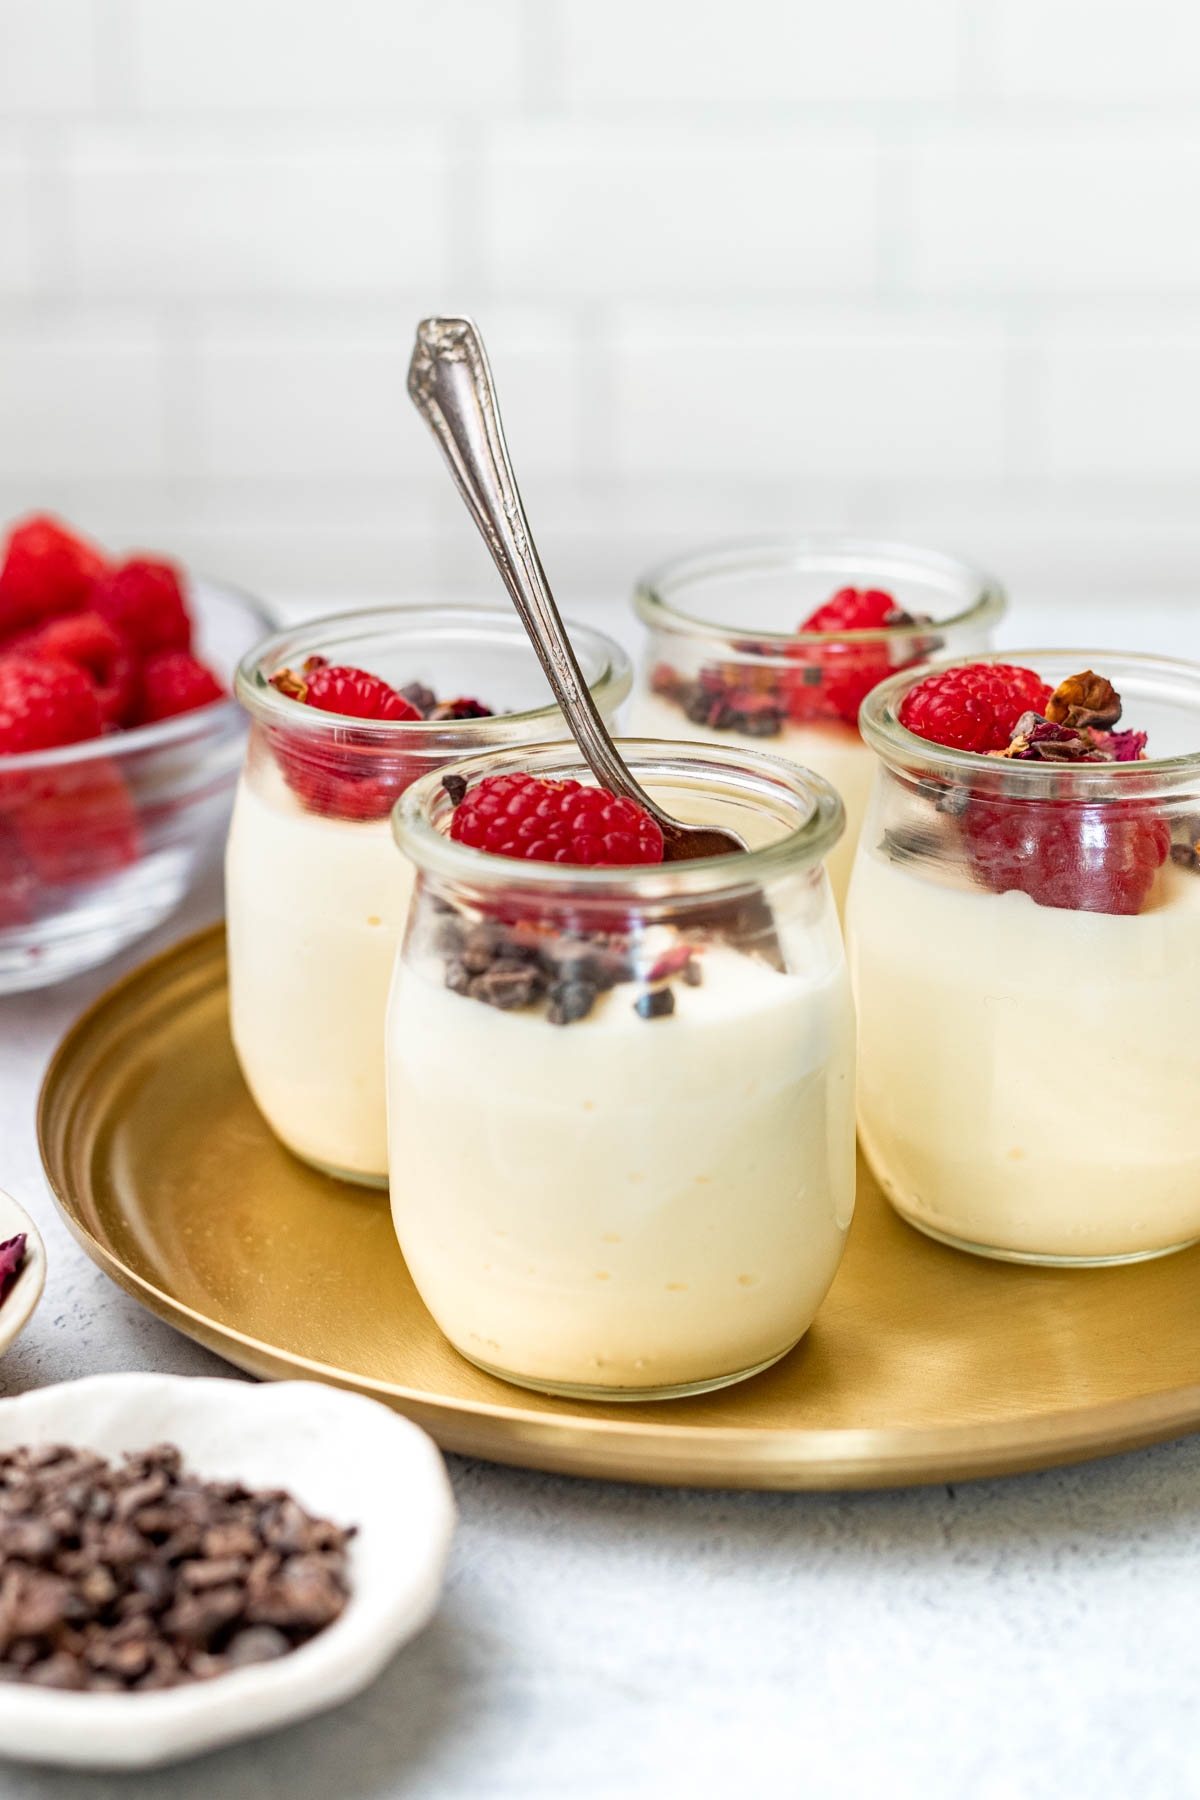 Jars of white chocolate mousse garnished with cacao nibs, raspberries, and dried rose petals on top.